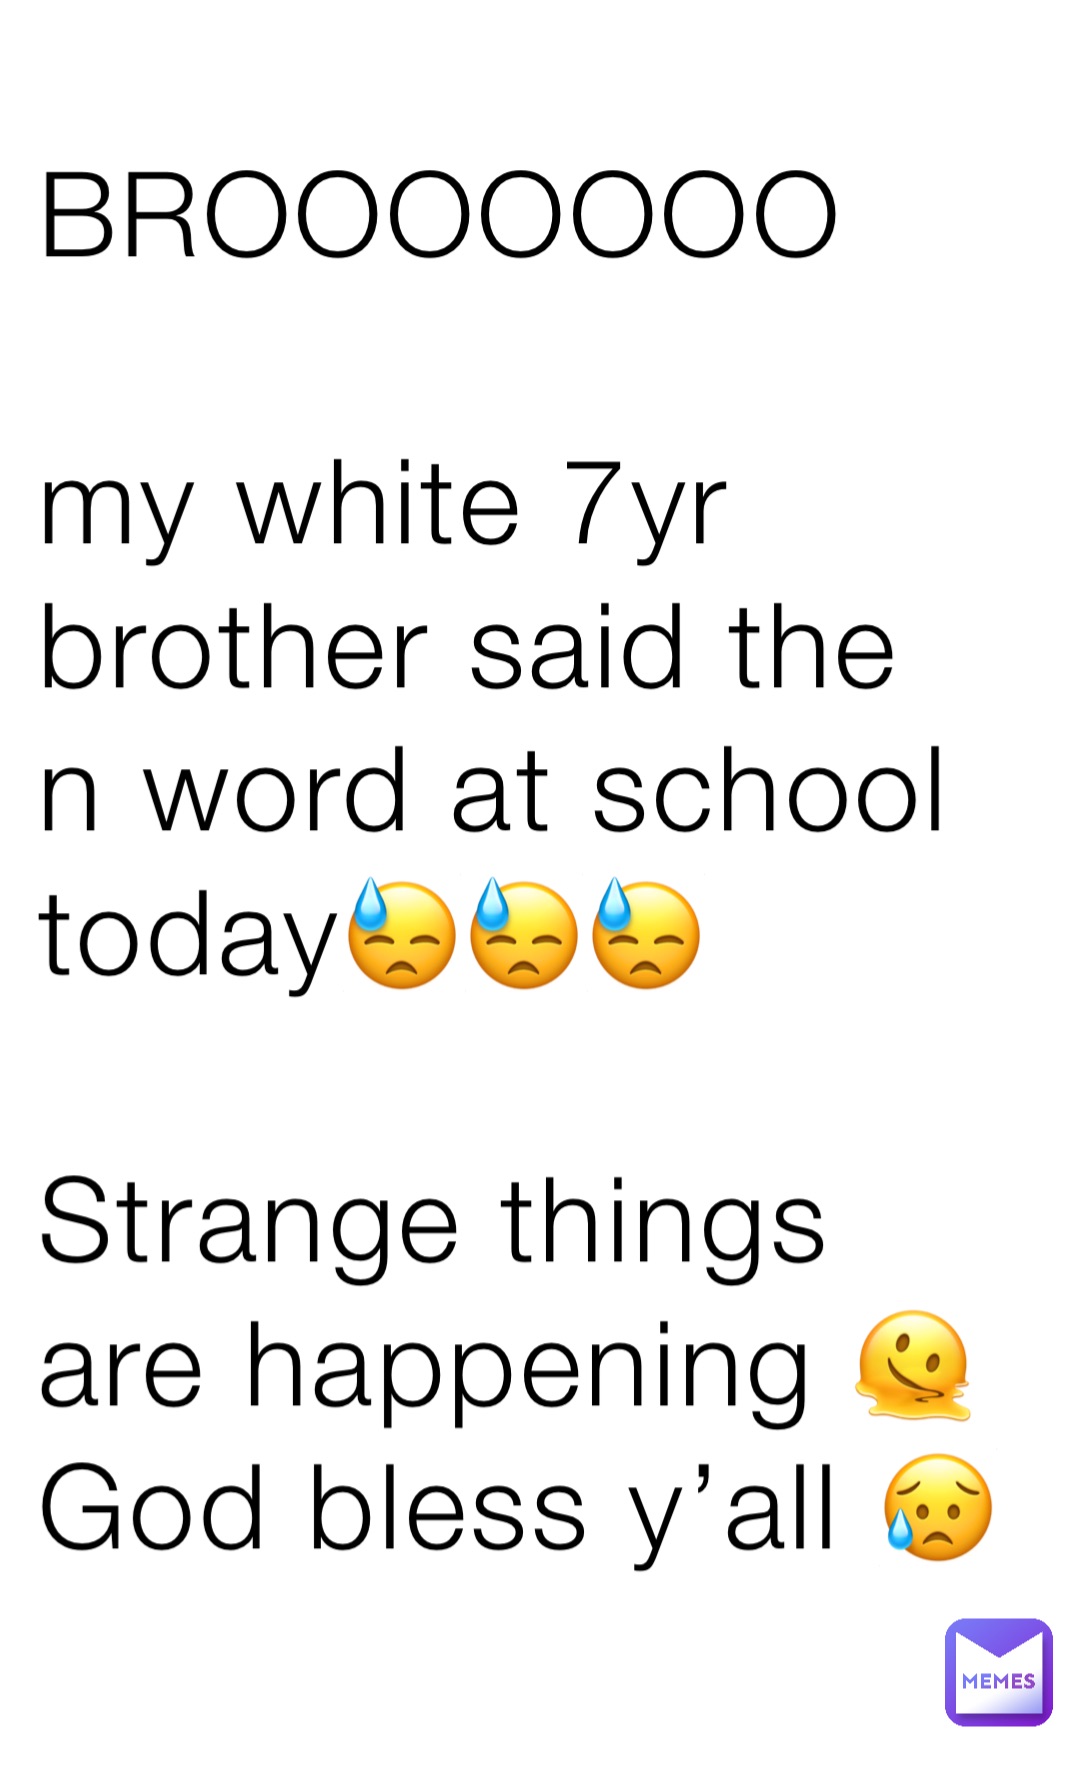 BROOOOOOO

my white 7yr brother said the 
n word at school today😓😓😓

Strange things are happening 🫠
God bless y’all 😥